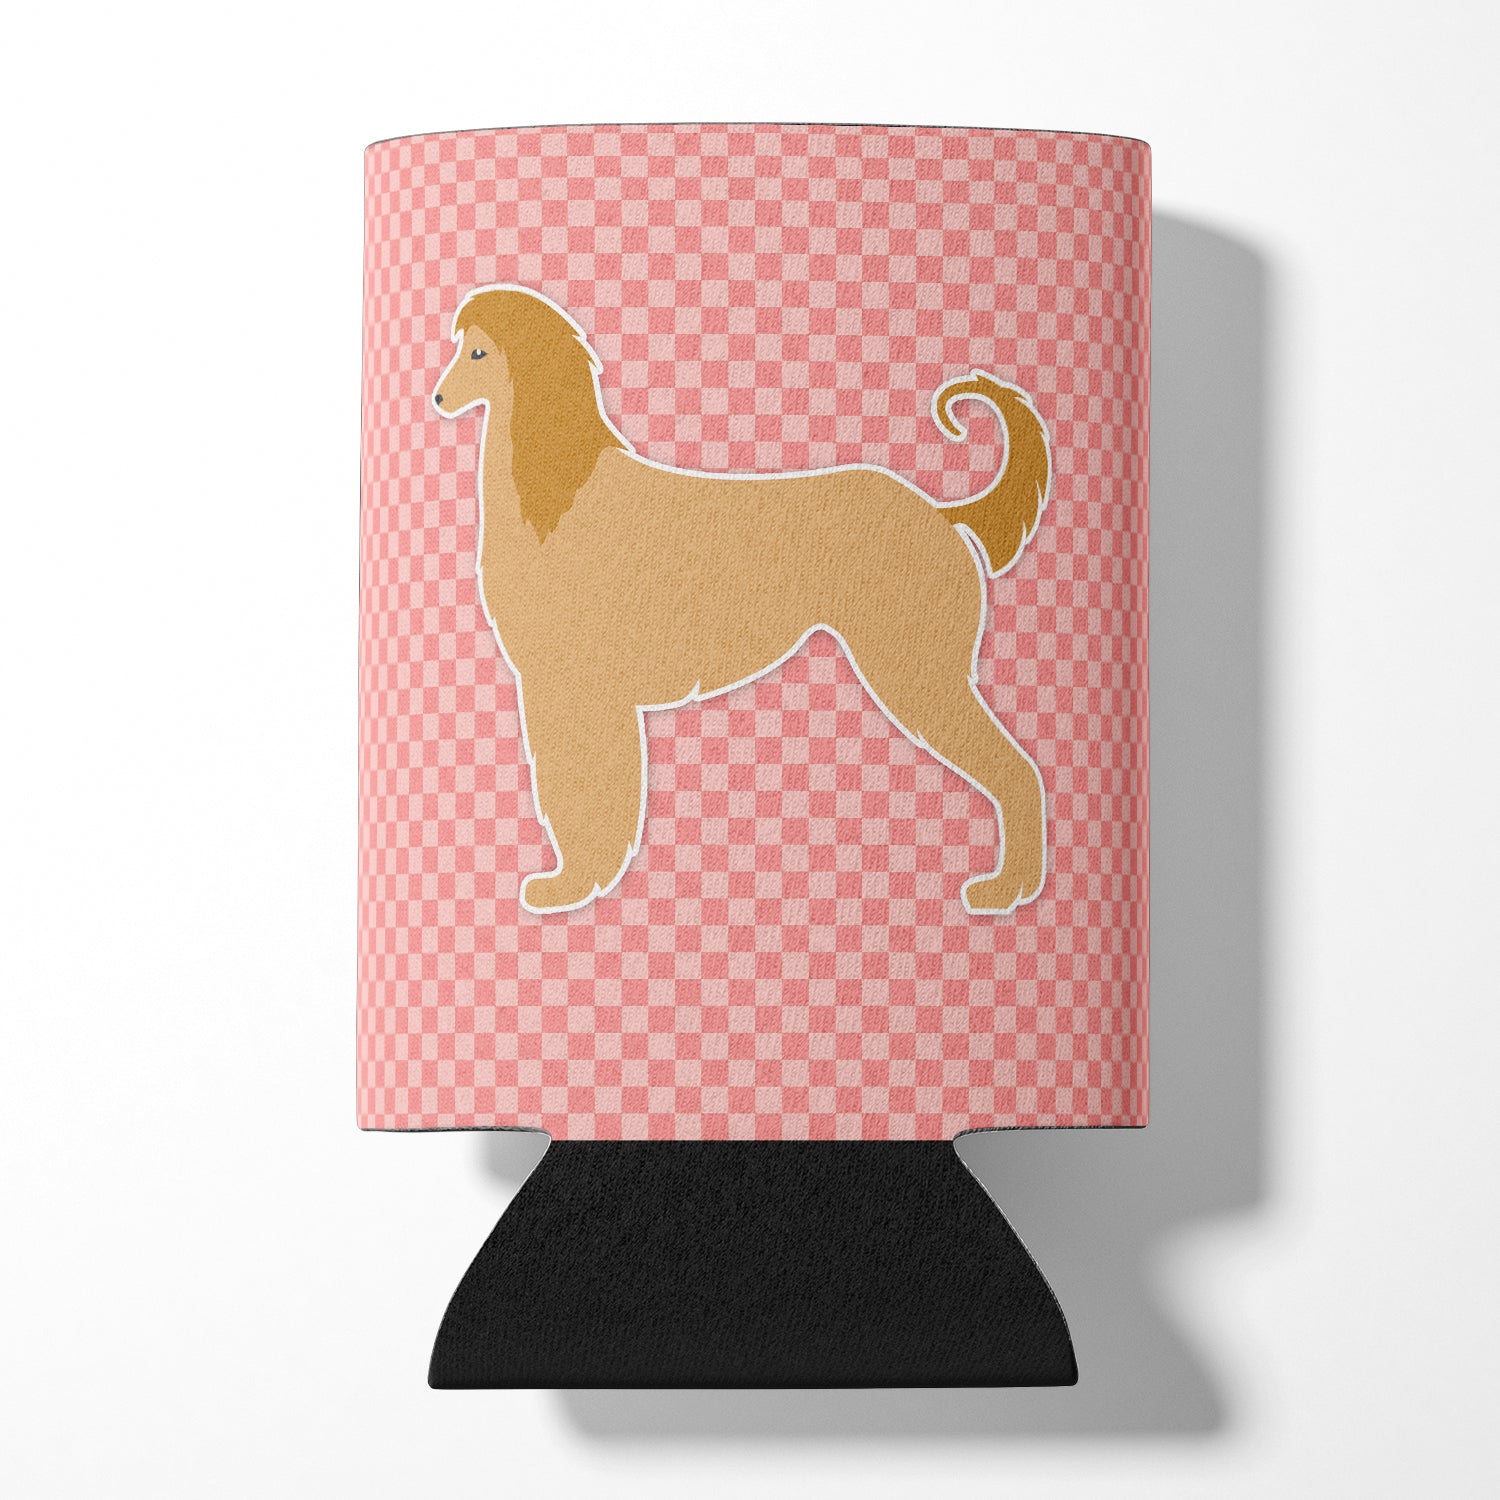 Afghan Hound Checkerboard Pink Can or Bottle Hugger BB3606CC  the-store.com.